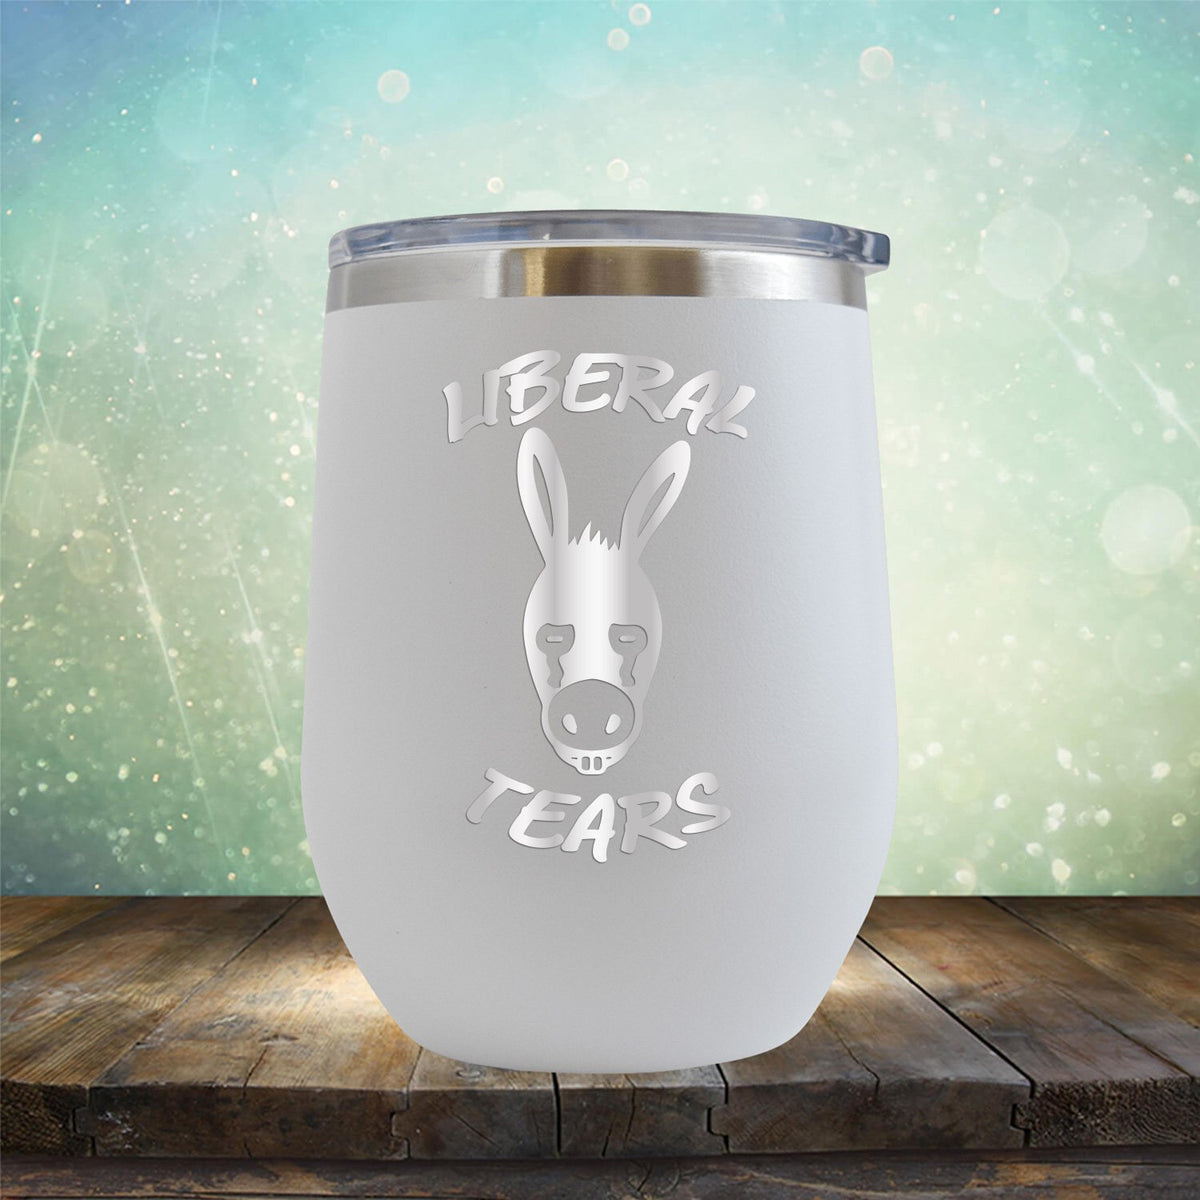 Liberal Tears Donkey - Stemless Wine Cup